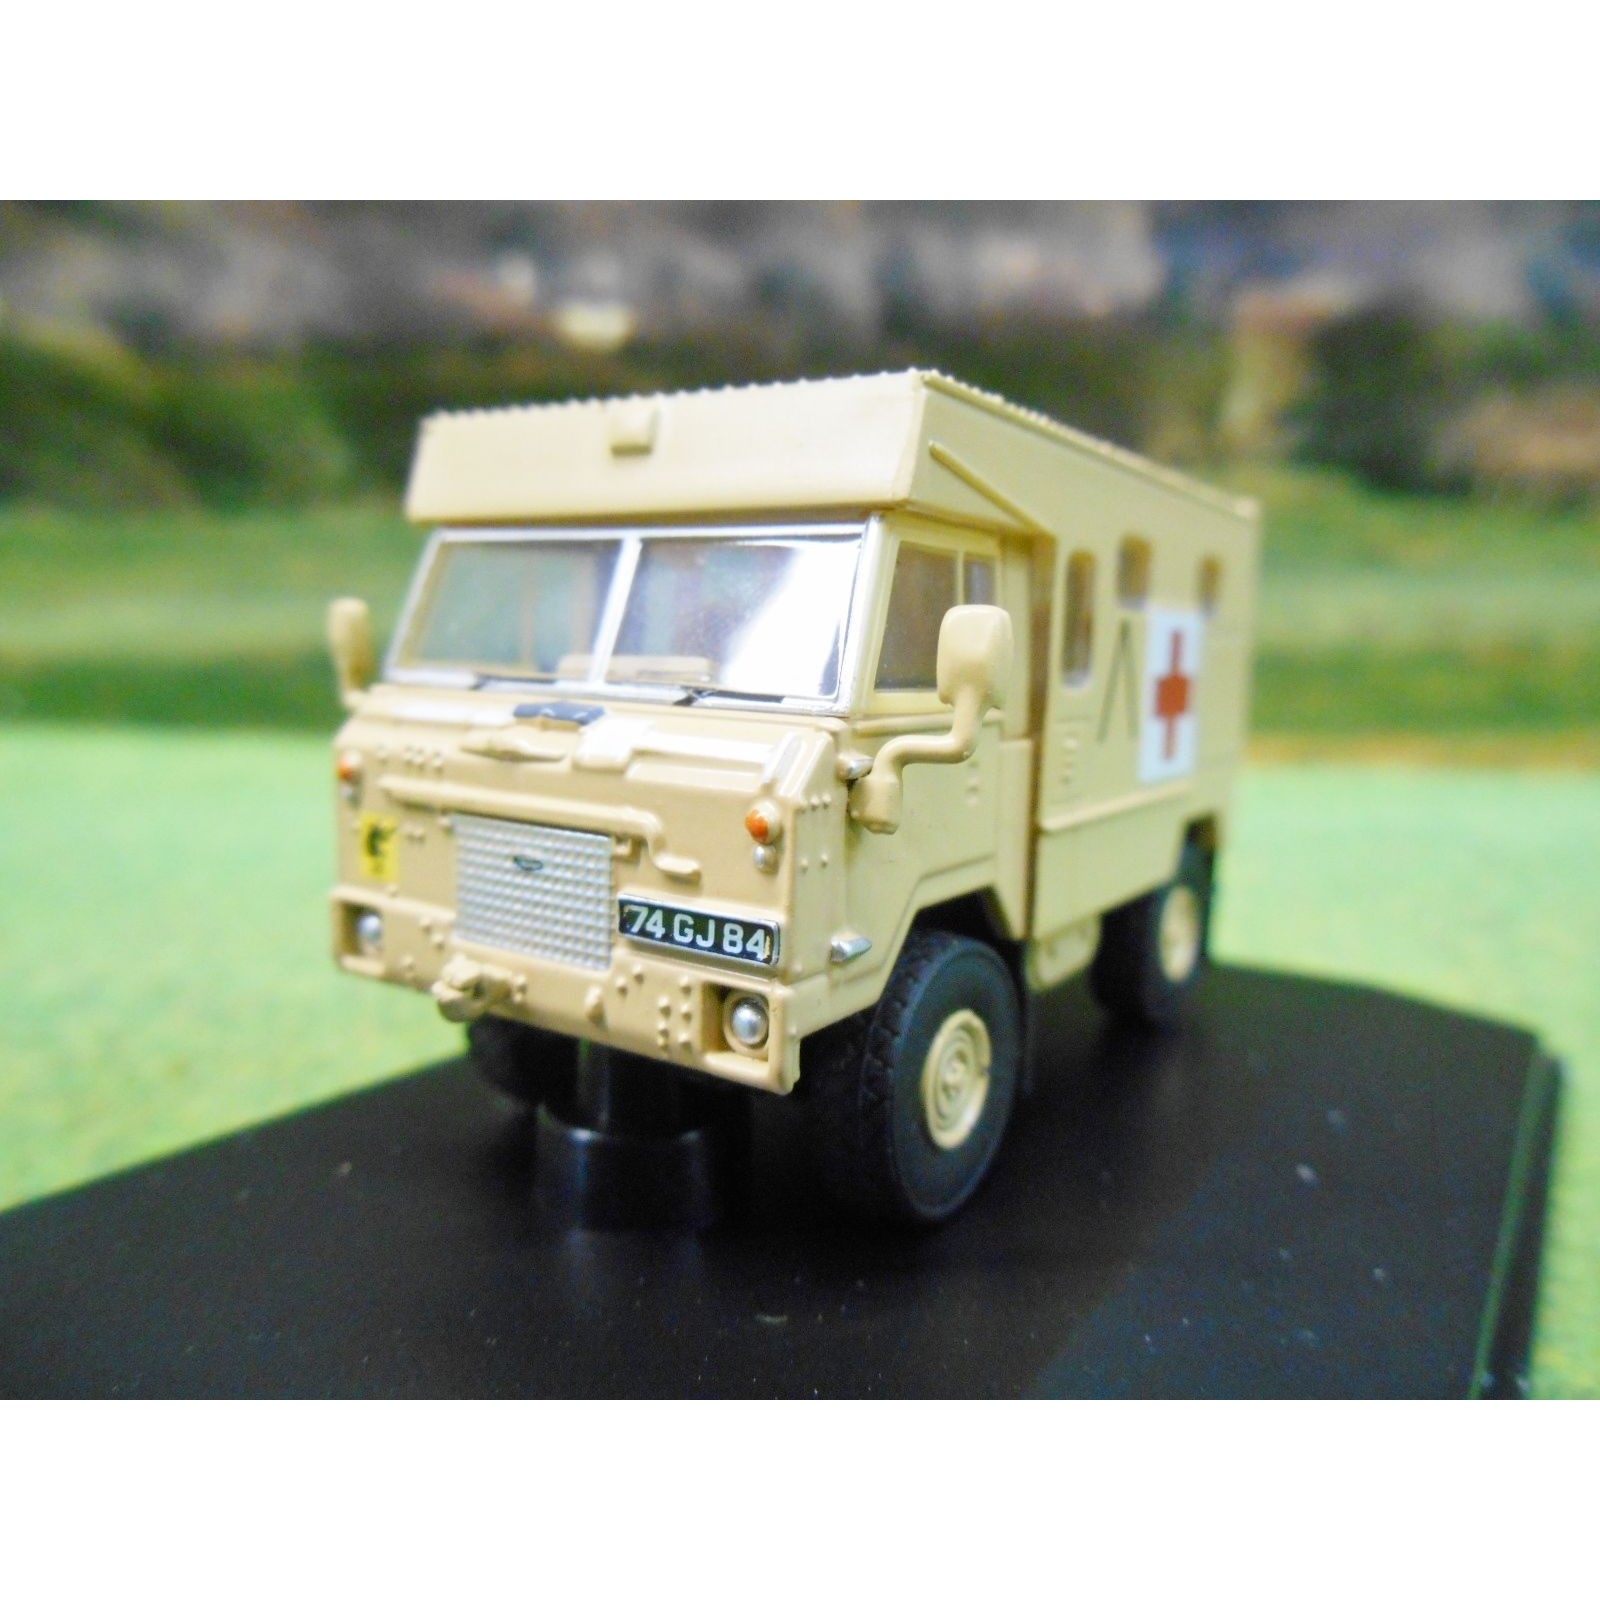 Oxford Military Vehicle Land Rover FC Ambulance Bosnia 76lrfca003 1 76 for sale online 